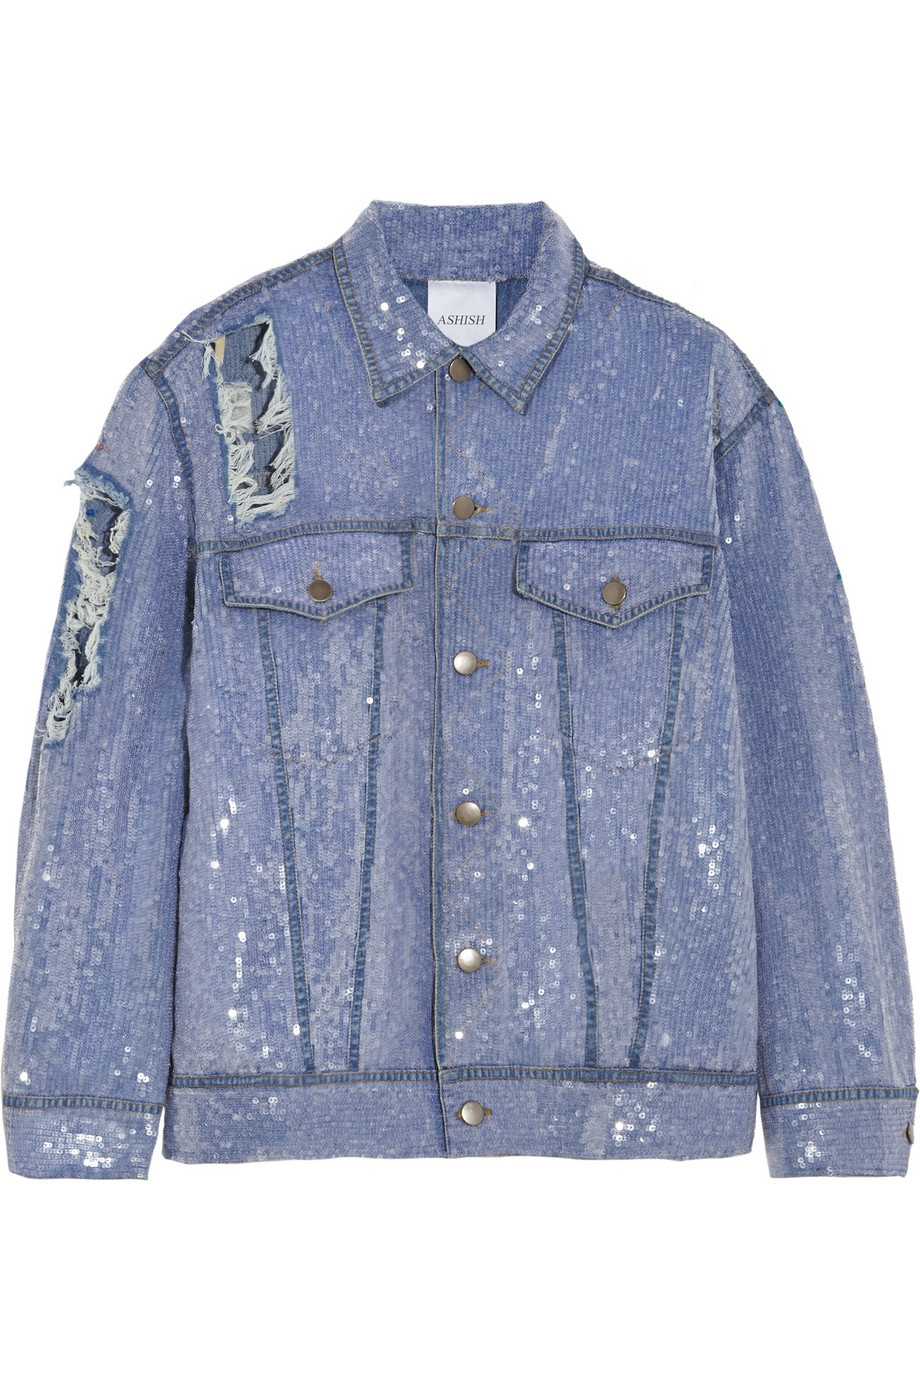 Ashish Sequined Distressed Denim Jacket in Blue - Lyst